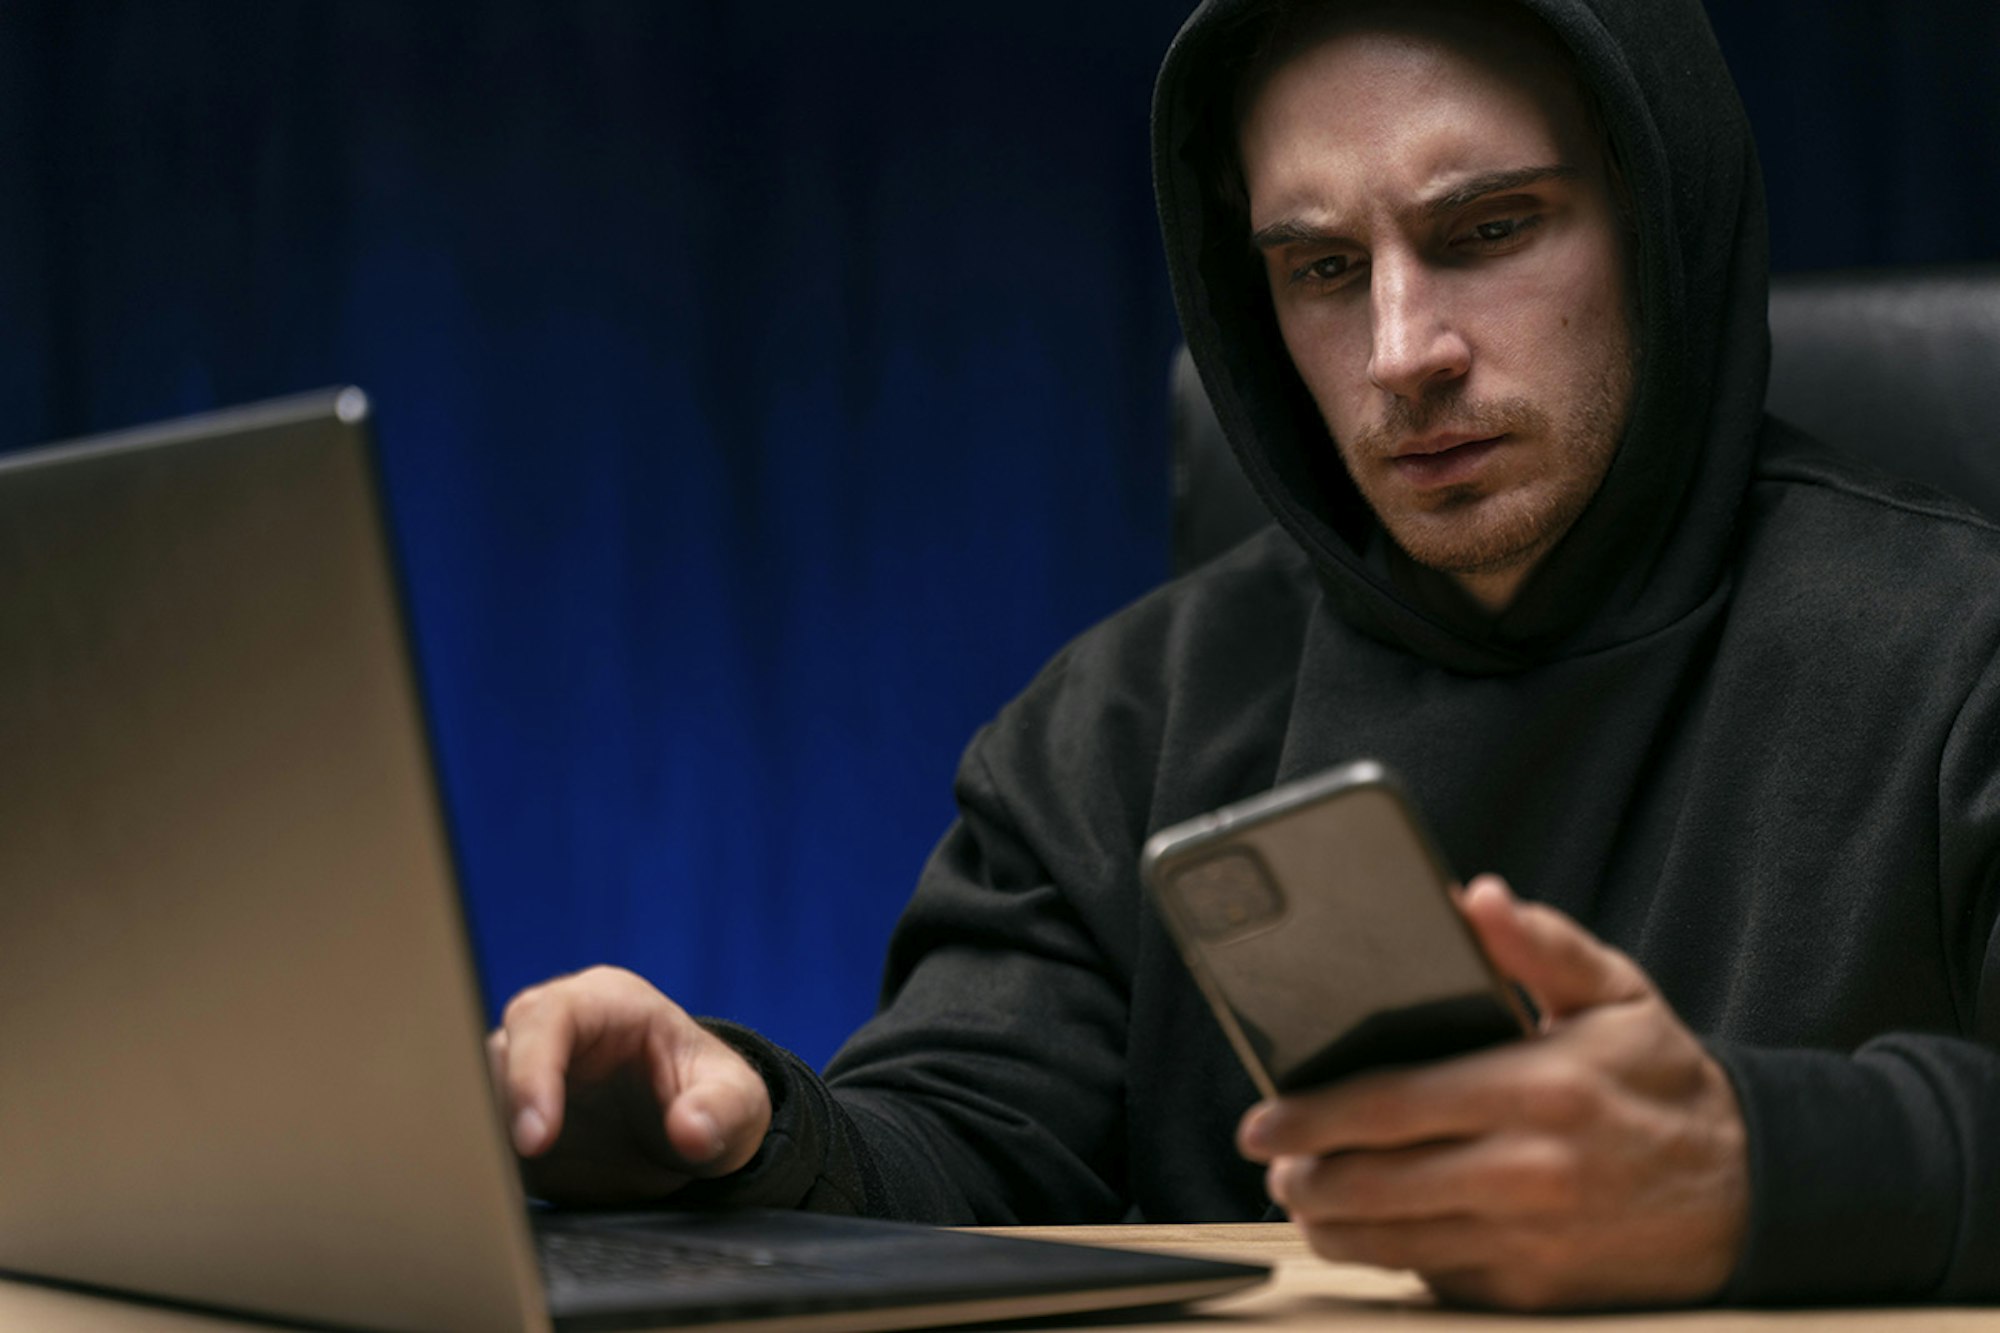 Cell Phone Security Weaknesses That Hackers Love